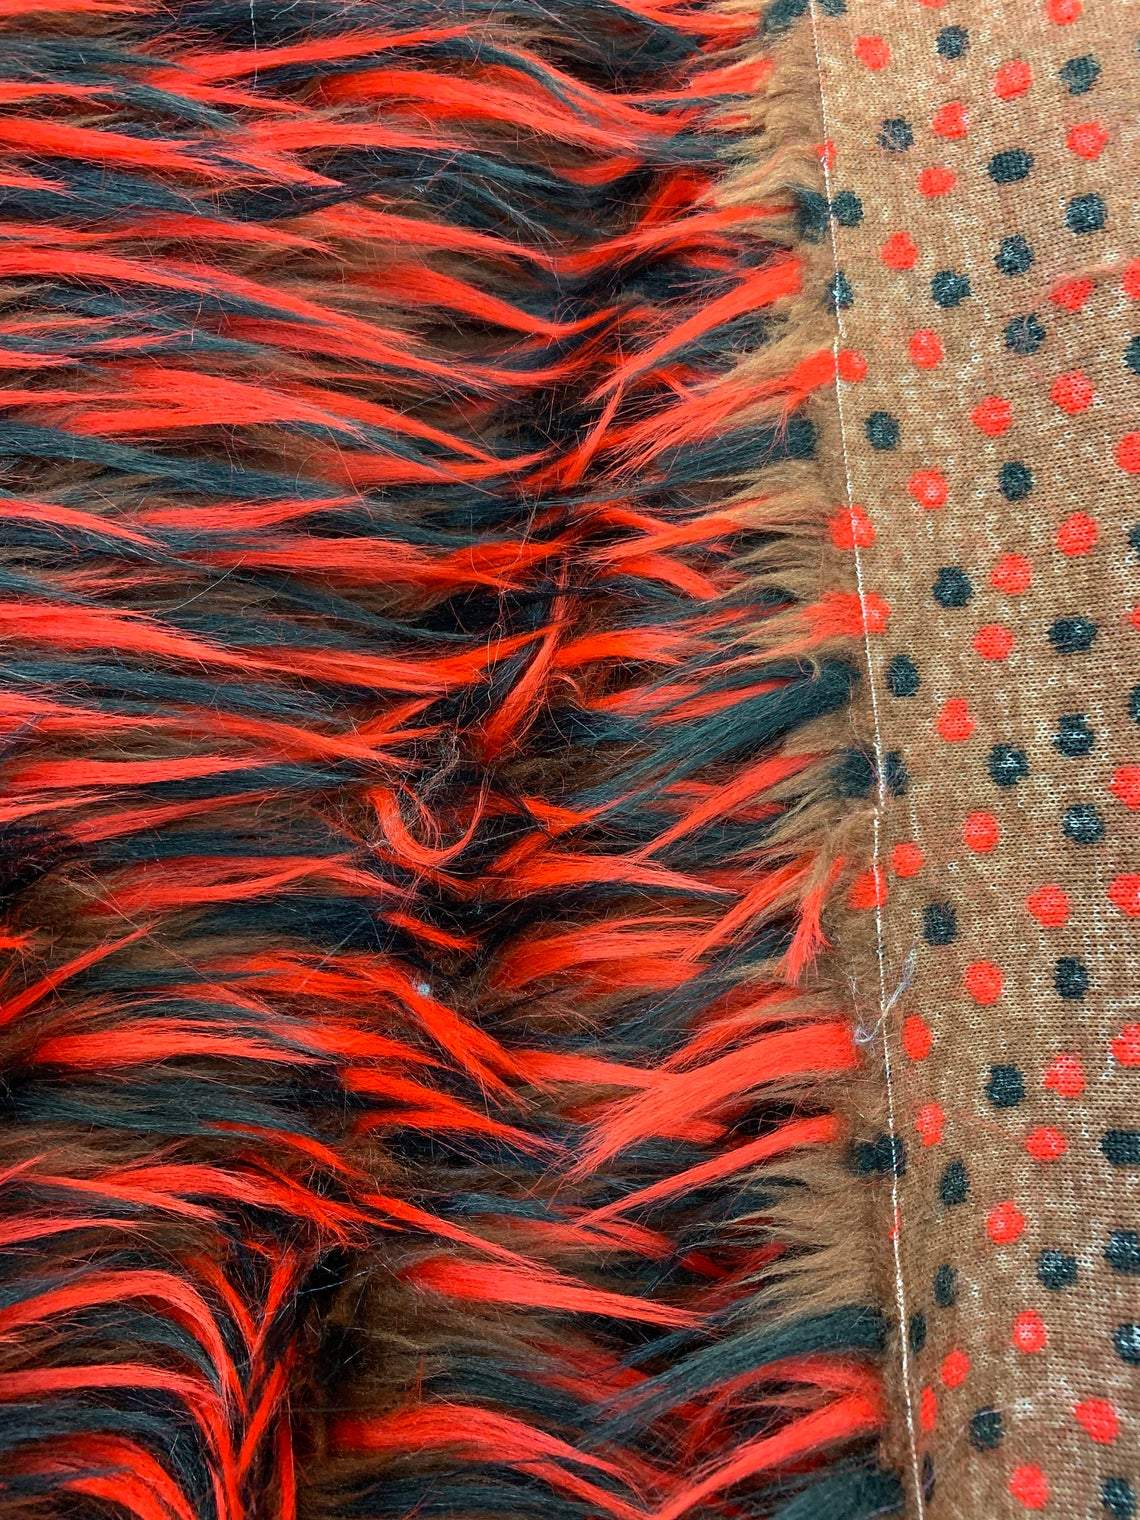 Red, Black and Brown Faux Fur Fabric By The Yard 3 Tone Fashion Fabric MaterialICE FABRICSICE FABRICSRed, Black and Brown Faux Fur Fabric By The Yard 3 Tone Fashion Fabric Material ICE FABRICS